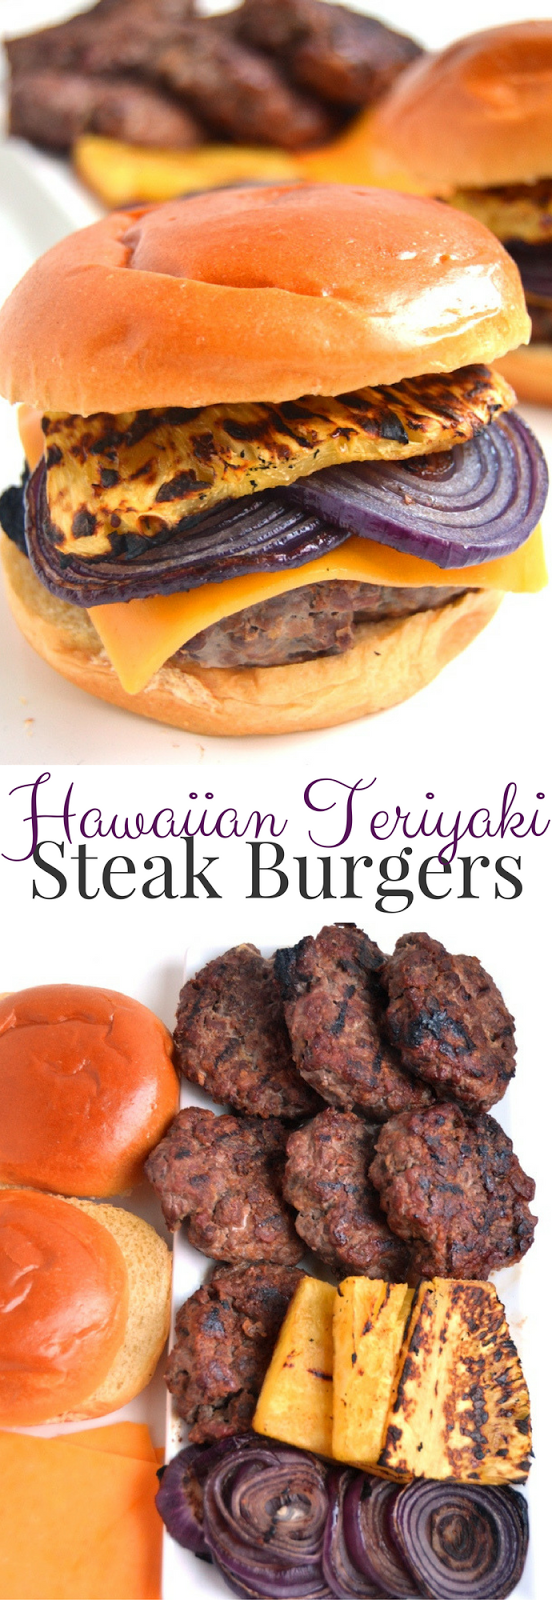 Hawaiian Teriyaki Steak Burgers feature freshly ground burgers, flavorful teriyaki sauce, grilled pineapple and red onions and melted cheddar cheese. www.nutritionistreviews.com